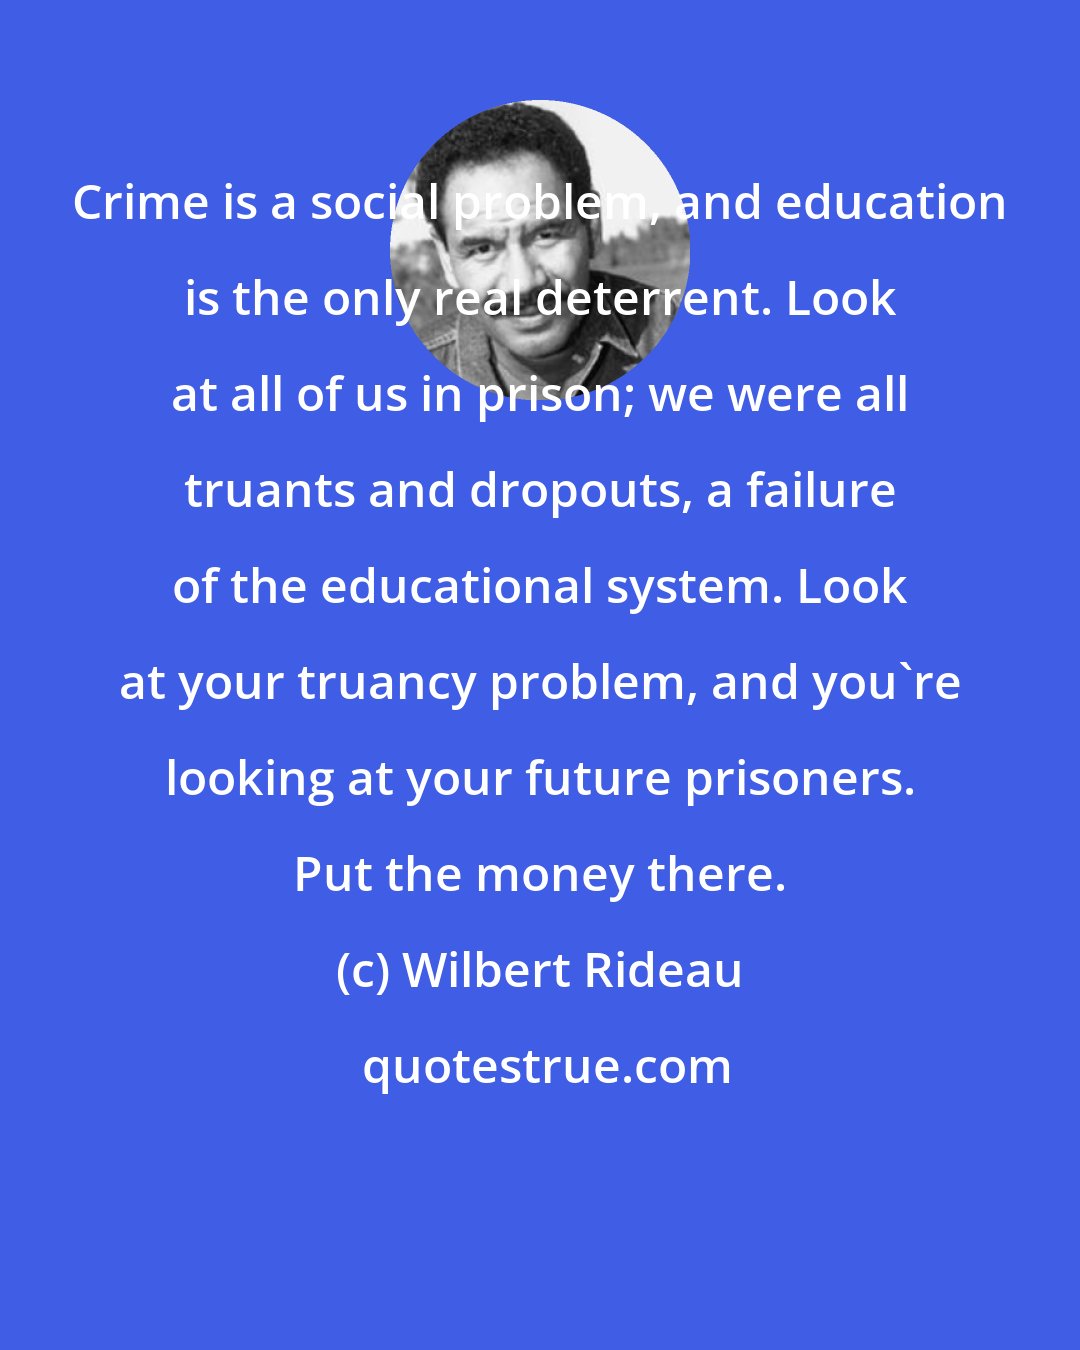 Wilbert Rideau: Crime is a social problem, and education is the only real deterrent. Look at all of us in prison; we were all truants and dropouts, a failure of the educational system. Look at your truancy problem, and you're looking at your future prisoners. Put the money there.